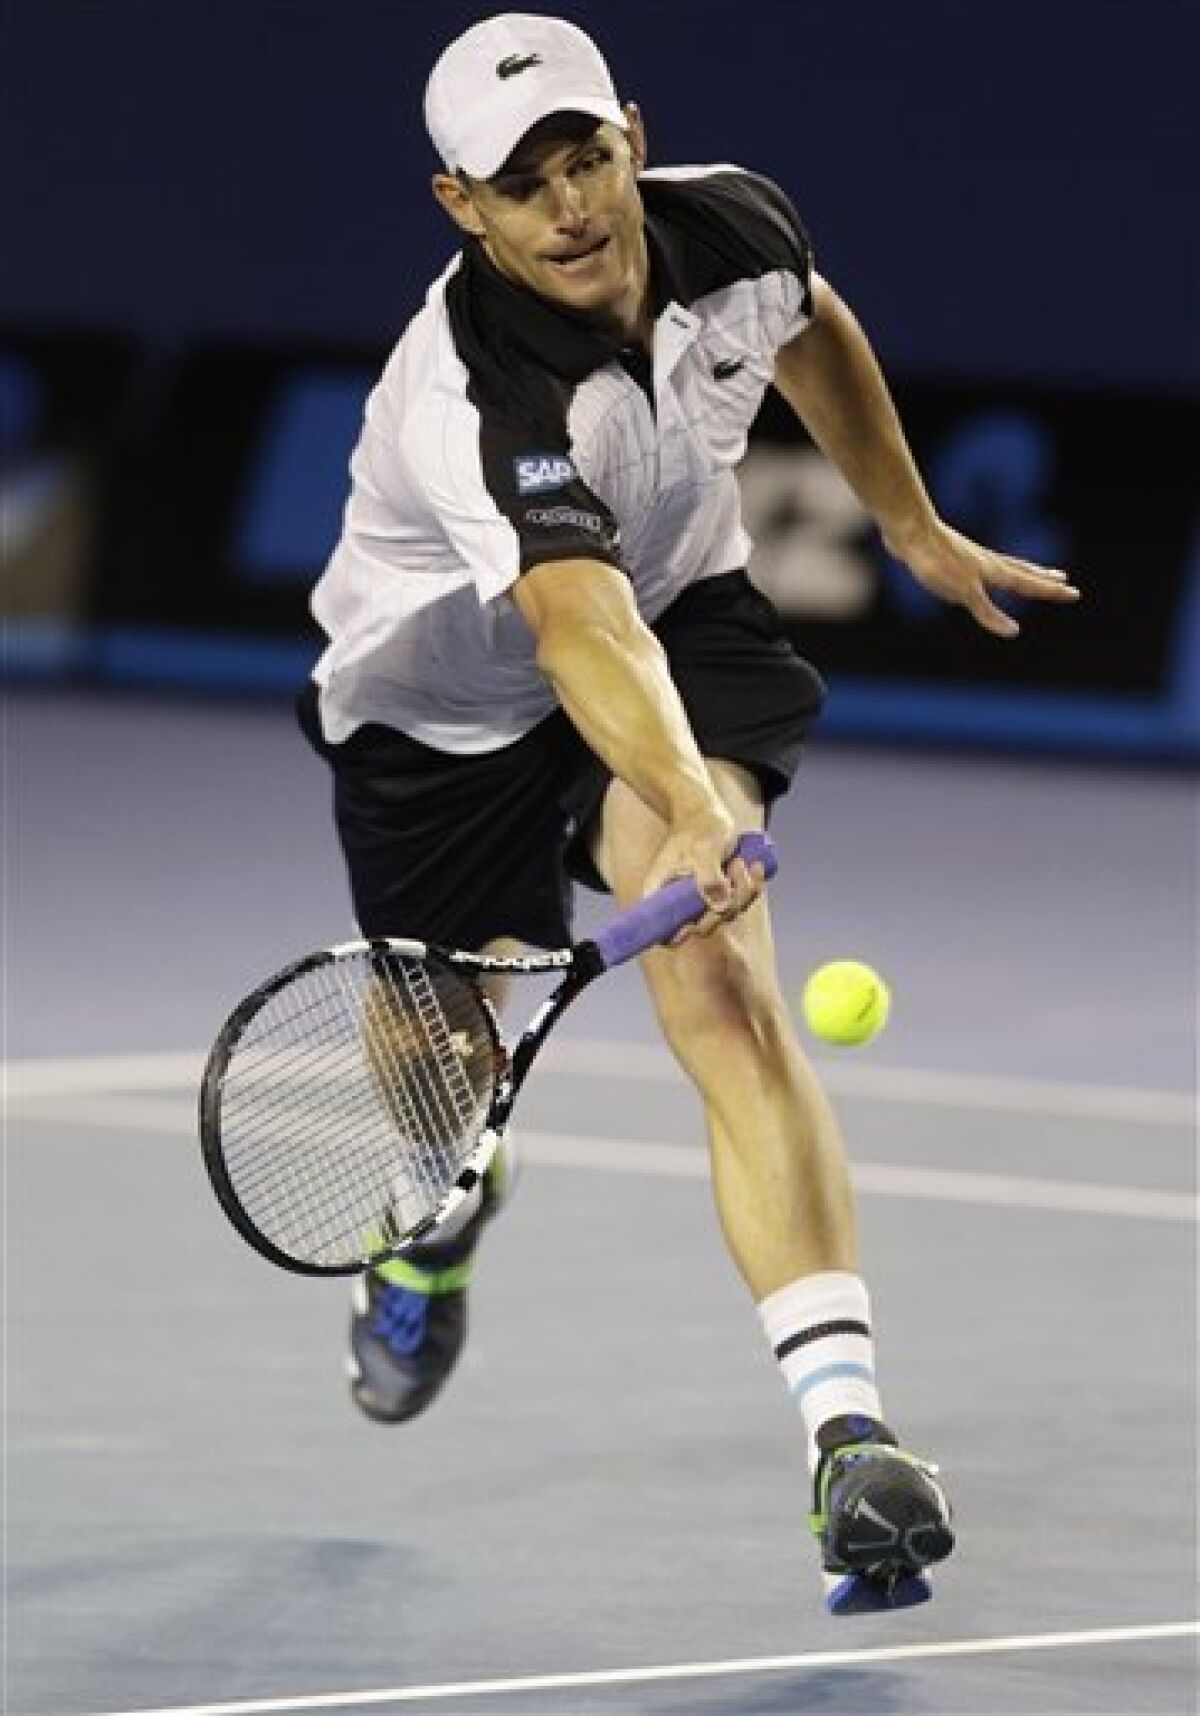 Andy Roddick of the US reaches for a forehand return to Australia's Lleyton Hewitt during their second round match at the Australian Open tennis championship, in Melbourne, Australia, Thursday, Jan. 19, 2012. (AP Photo/John Donegan)